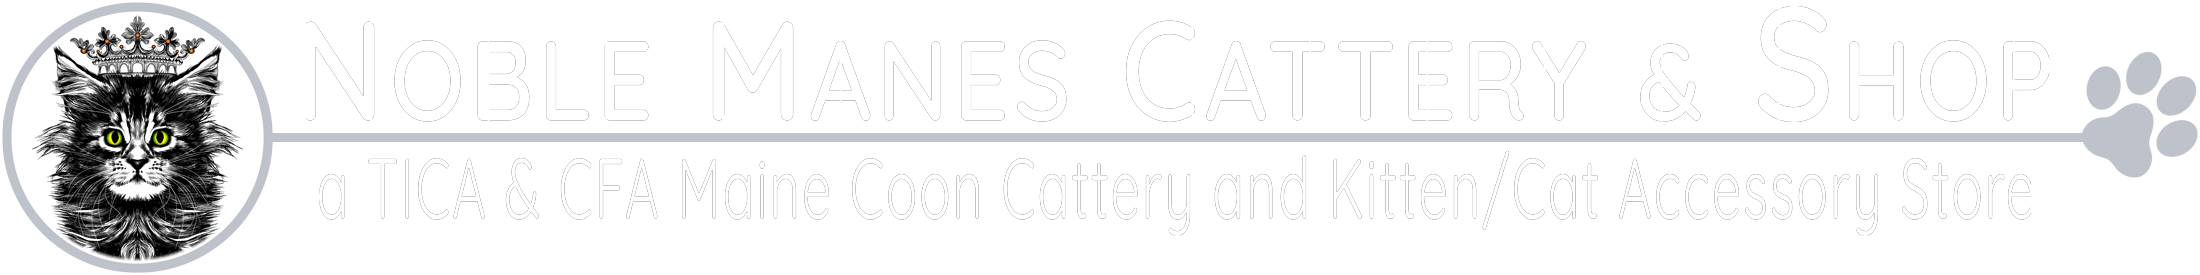 Noble Manes Cattery